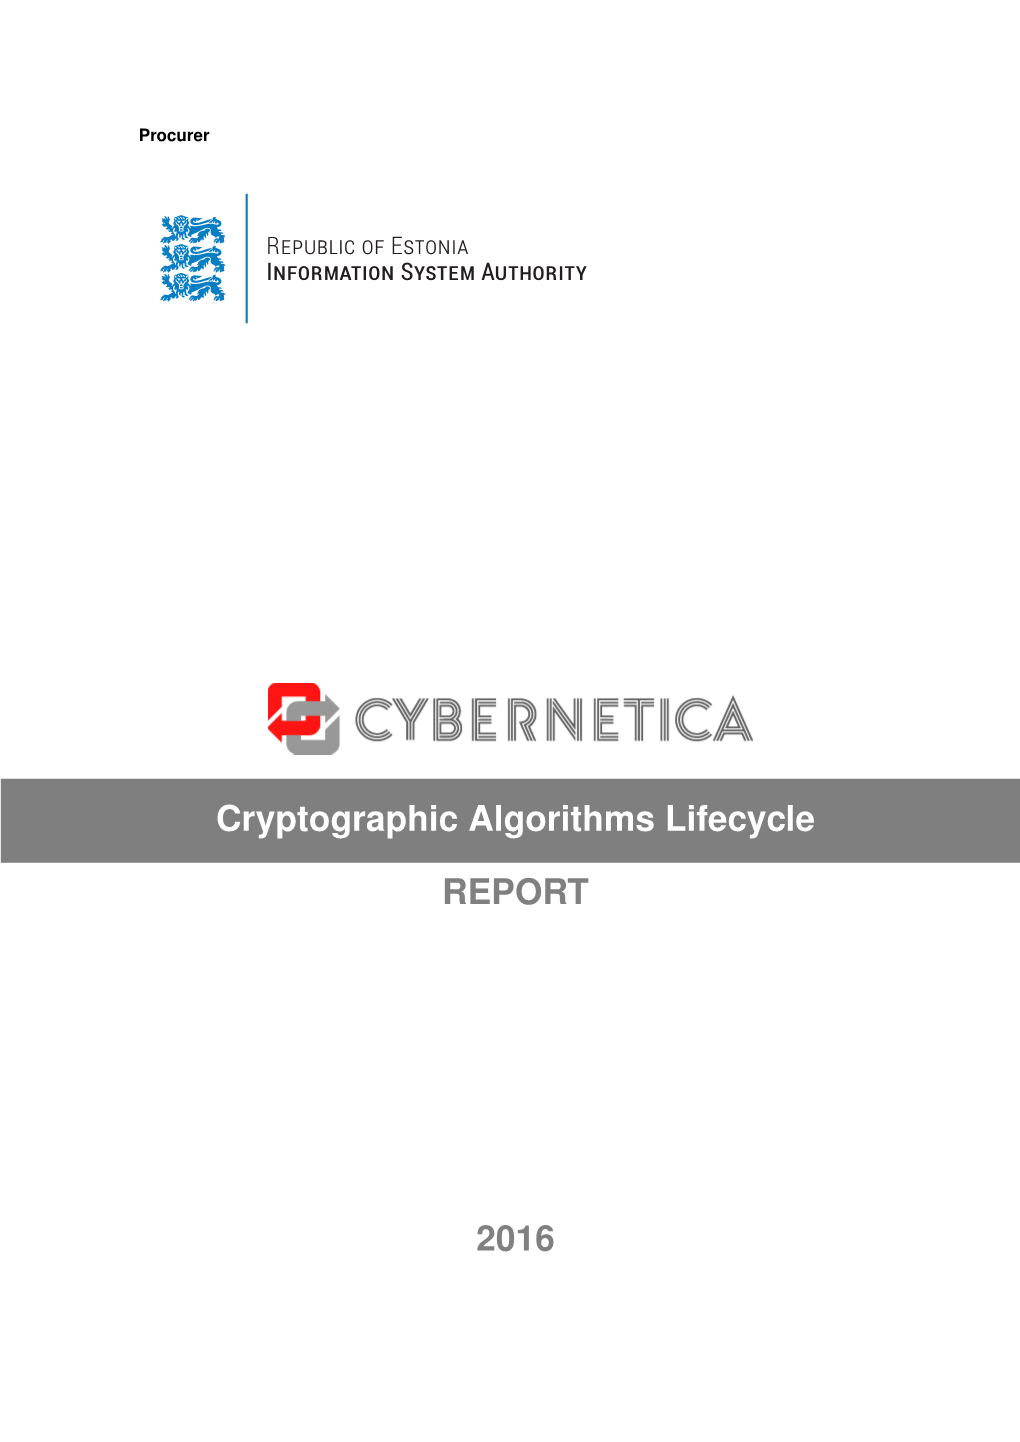 Cryptographic Algorithms Lifecycle Report 2016